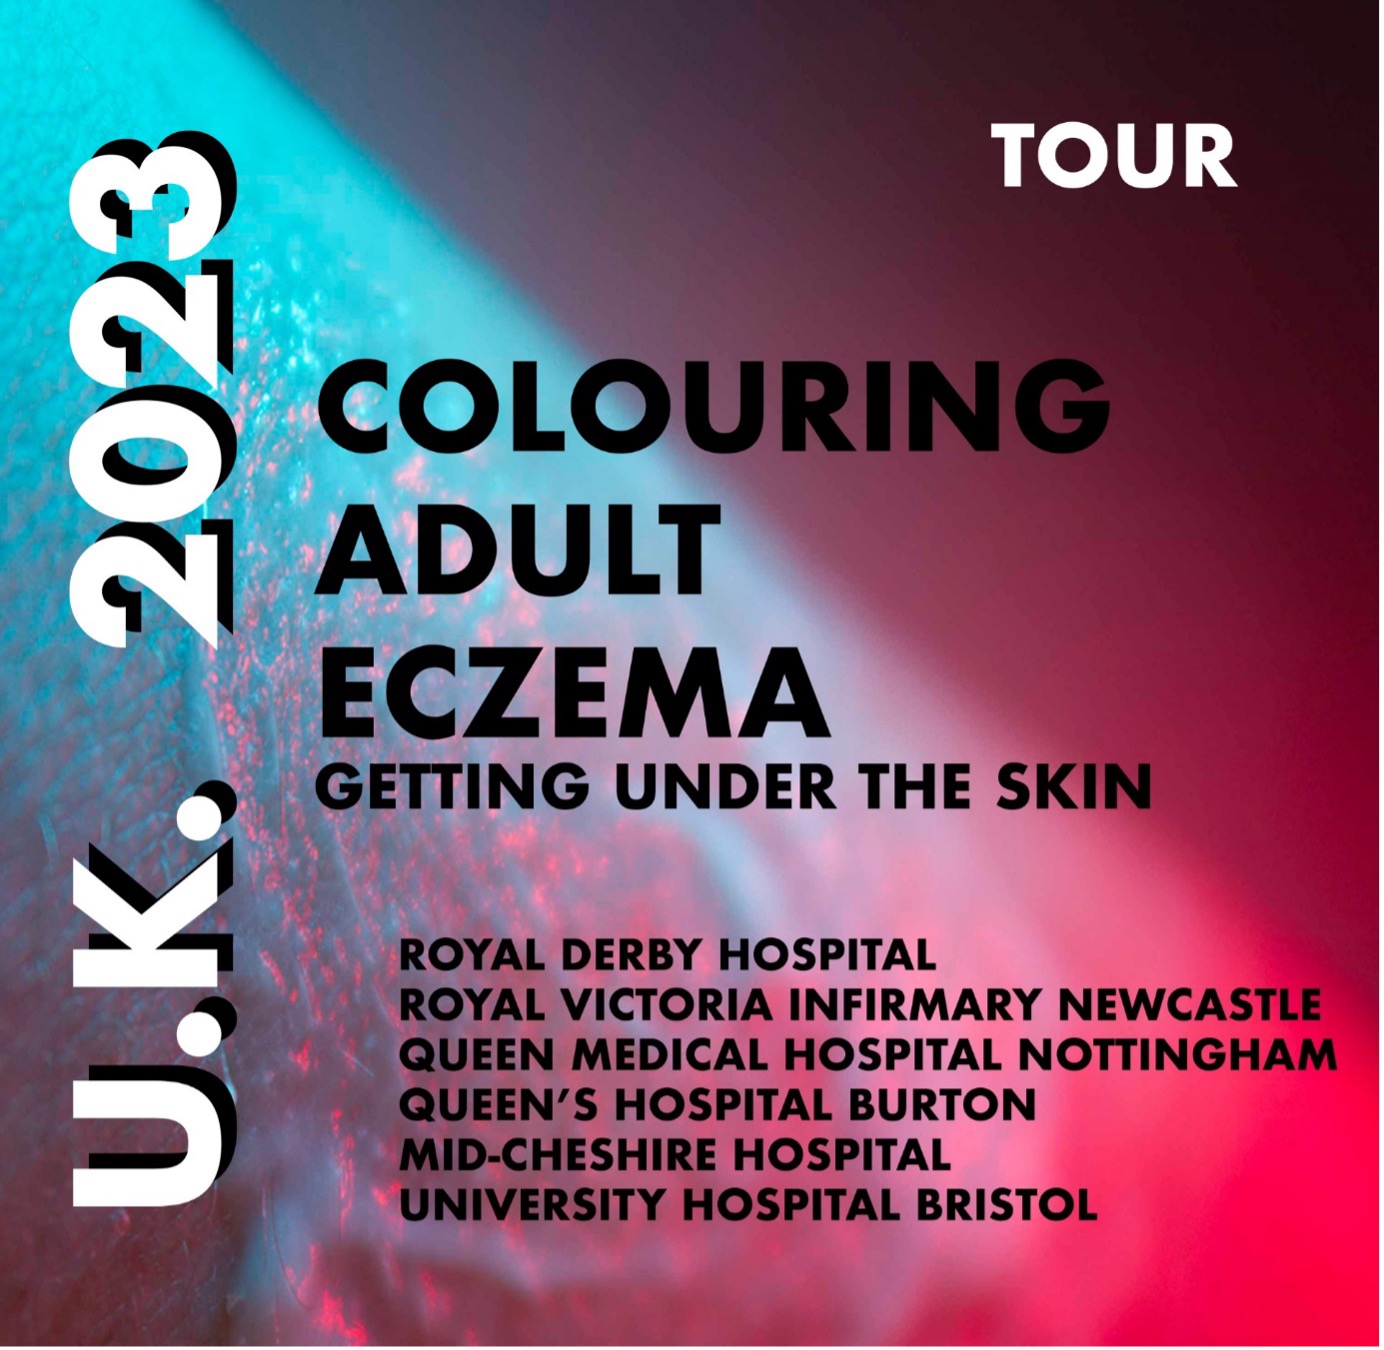 Colouring Adult Eczema UK 2023 tour poster listing locations